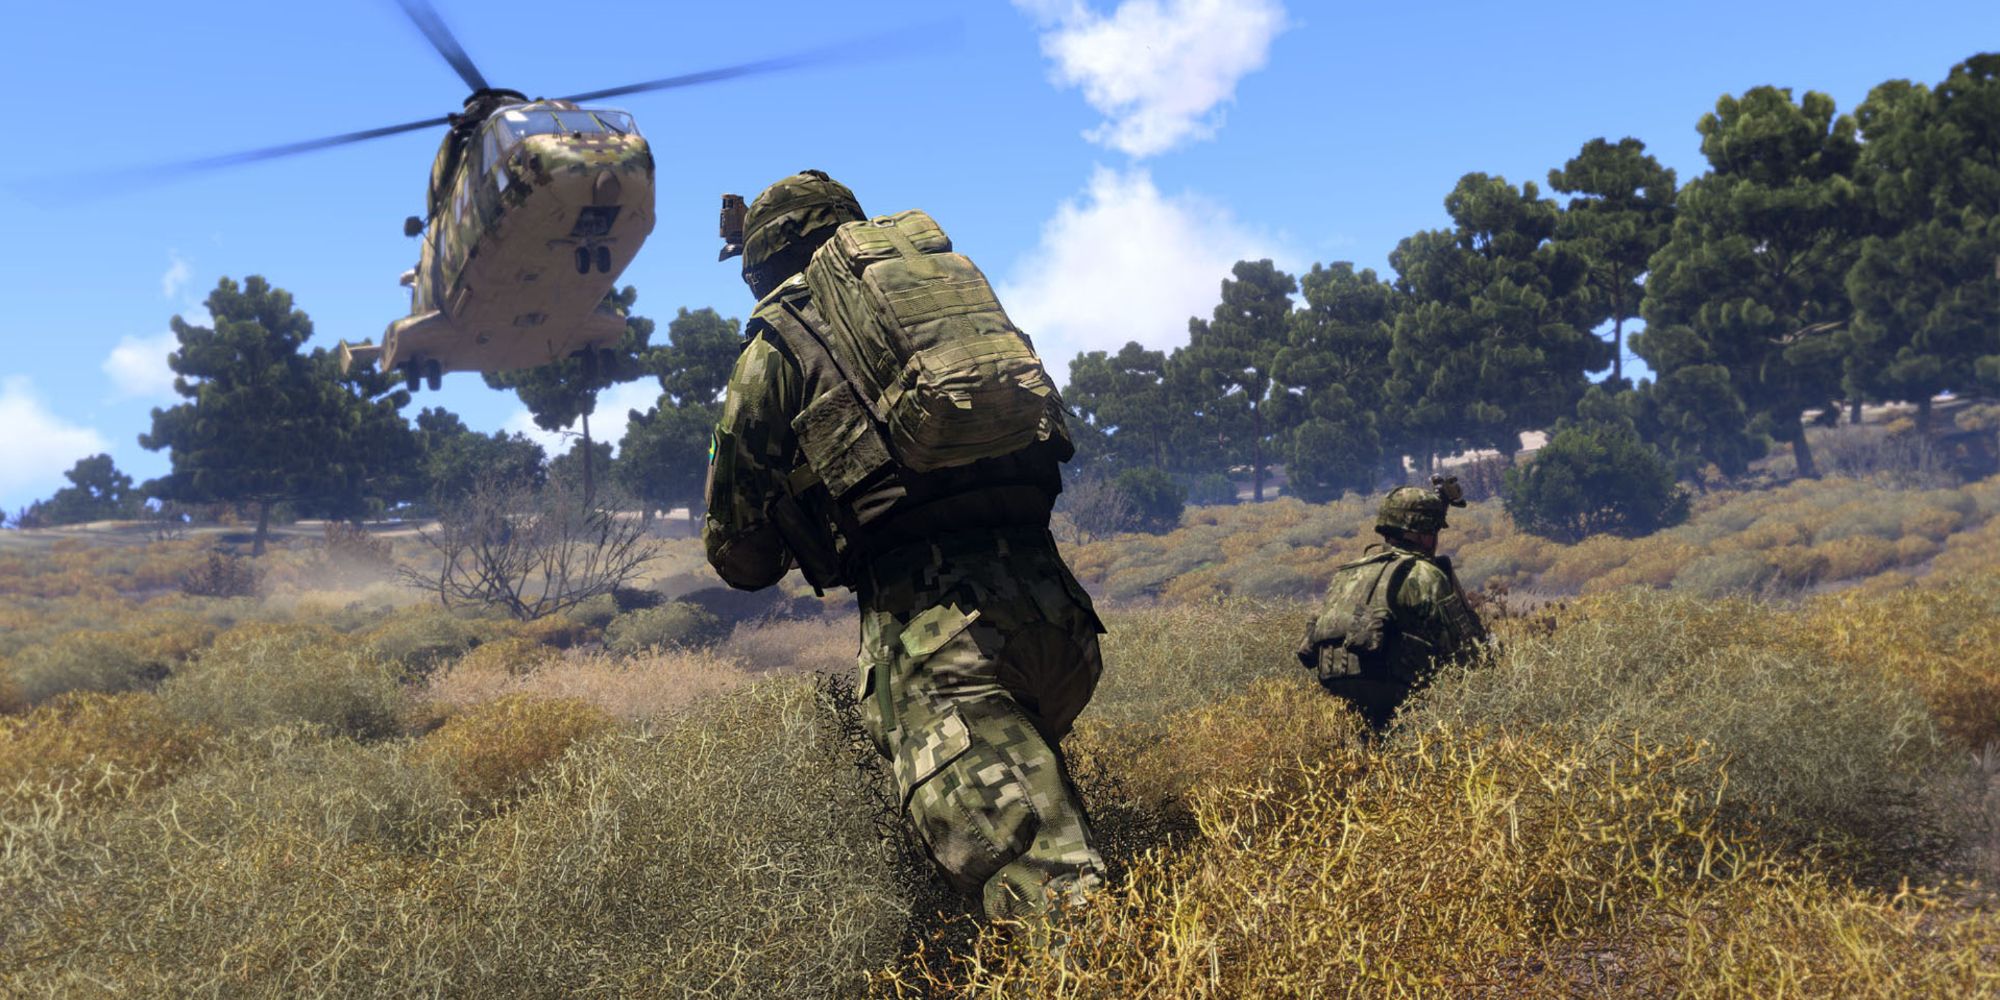 Two soldiers standing beneath a helicopter in Arma 3